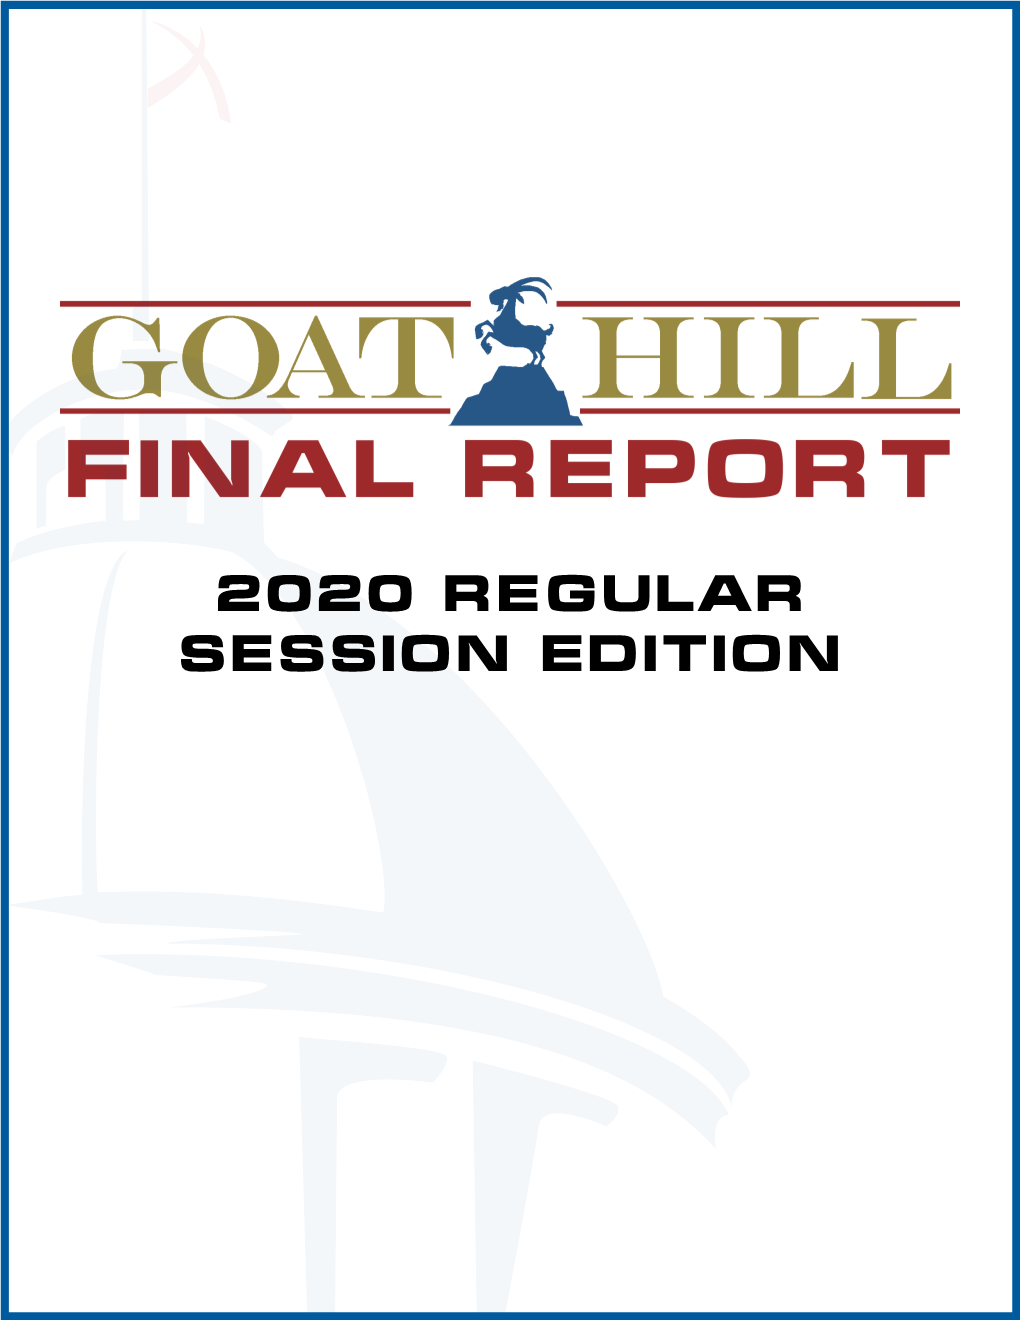 Goat Hill Final Report – 2020 Regular Session Edition